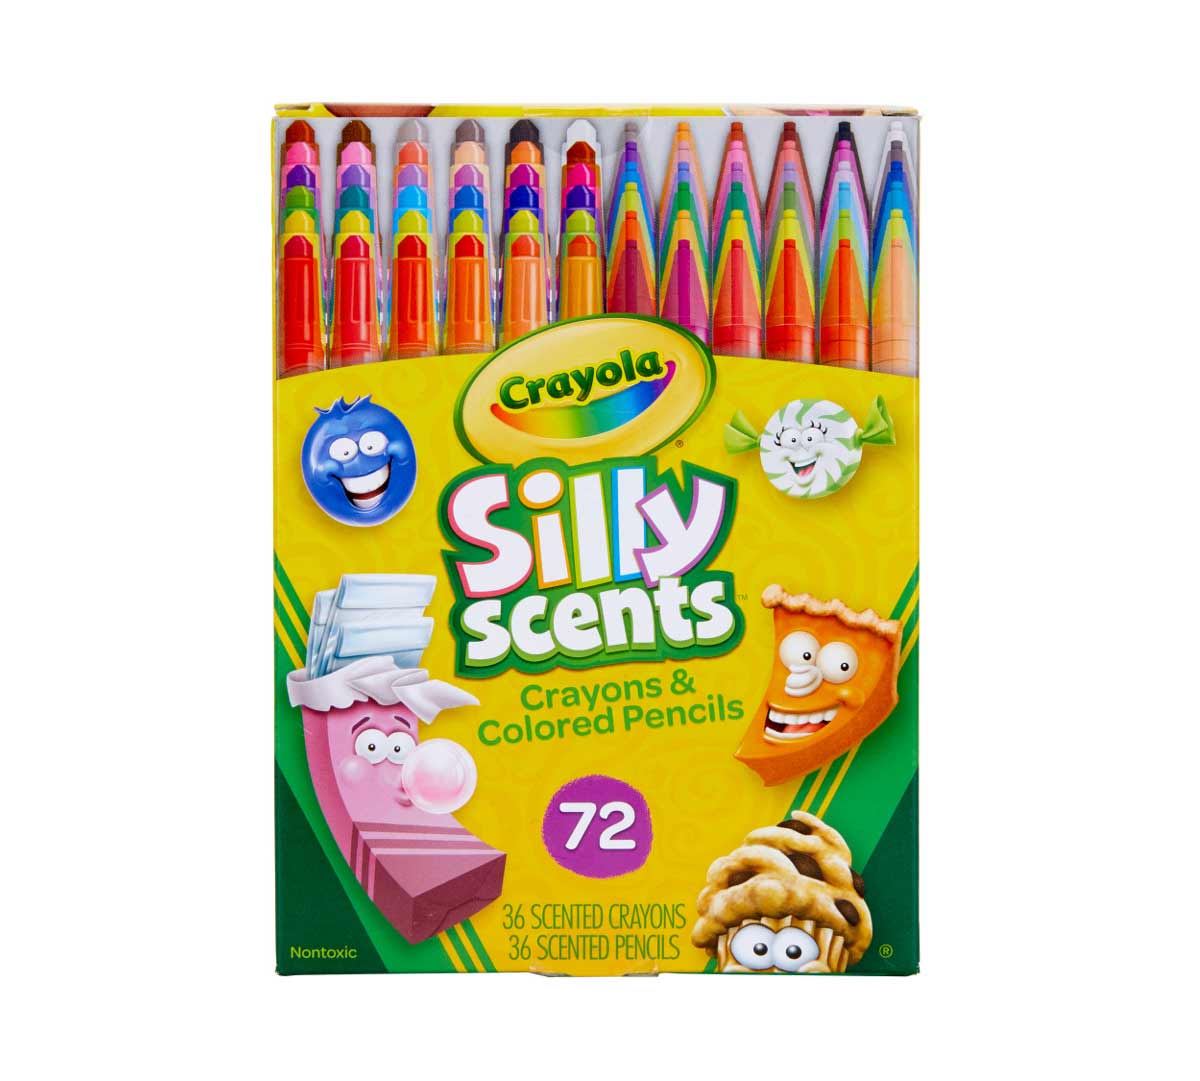 https://shop.crayola.com/on/demandware.static/-/Sites-crayola-storefront/default/dw75065b65/images/52-9706-0-200_Silly-Scents_Crayons-&-Colored-Pencils_72ct_F1.jpg